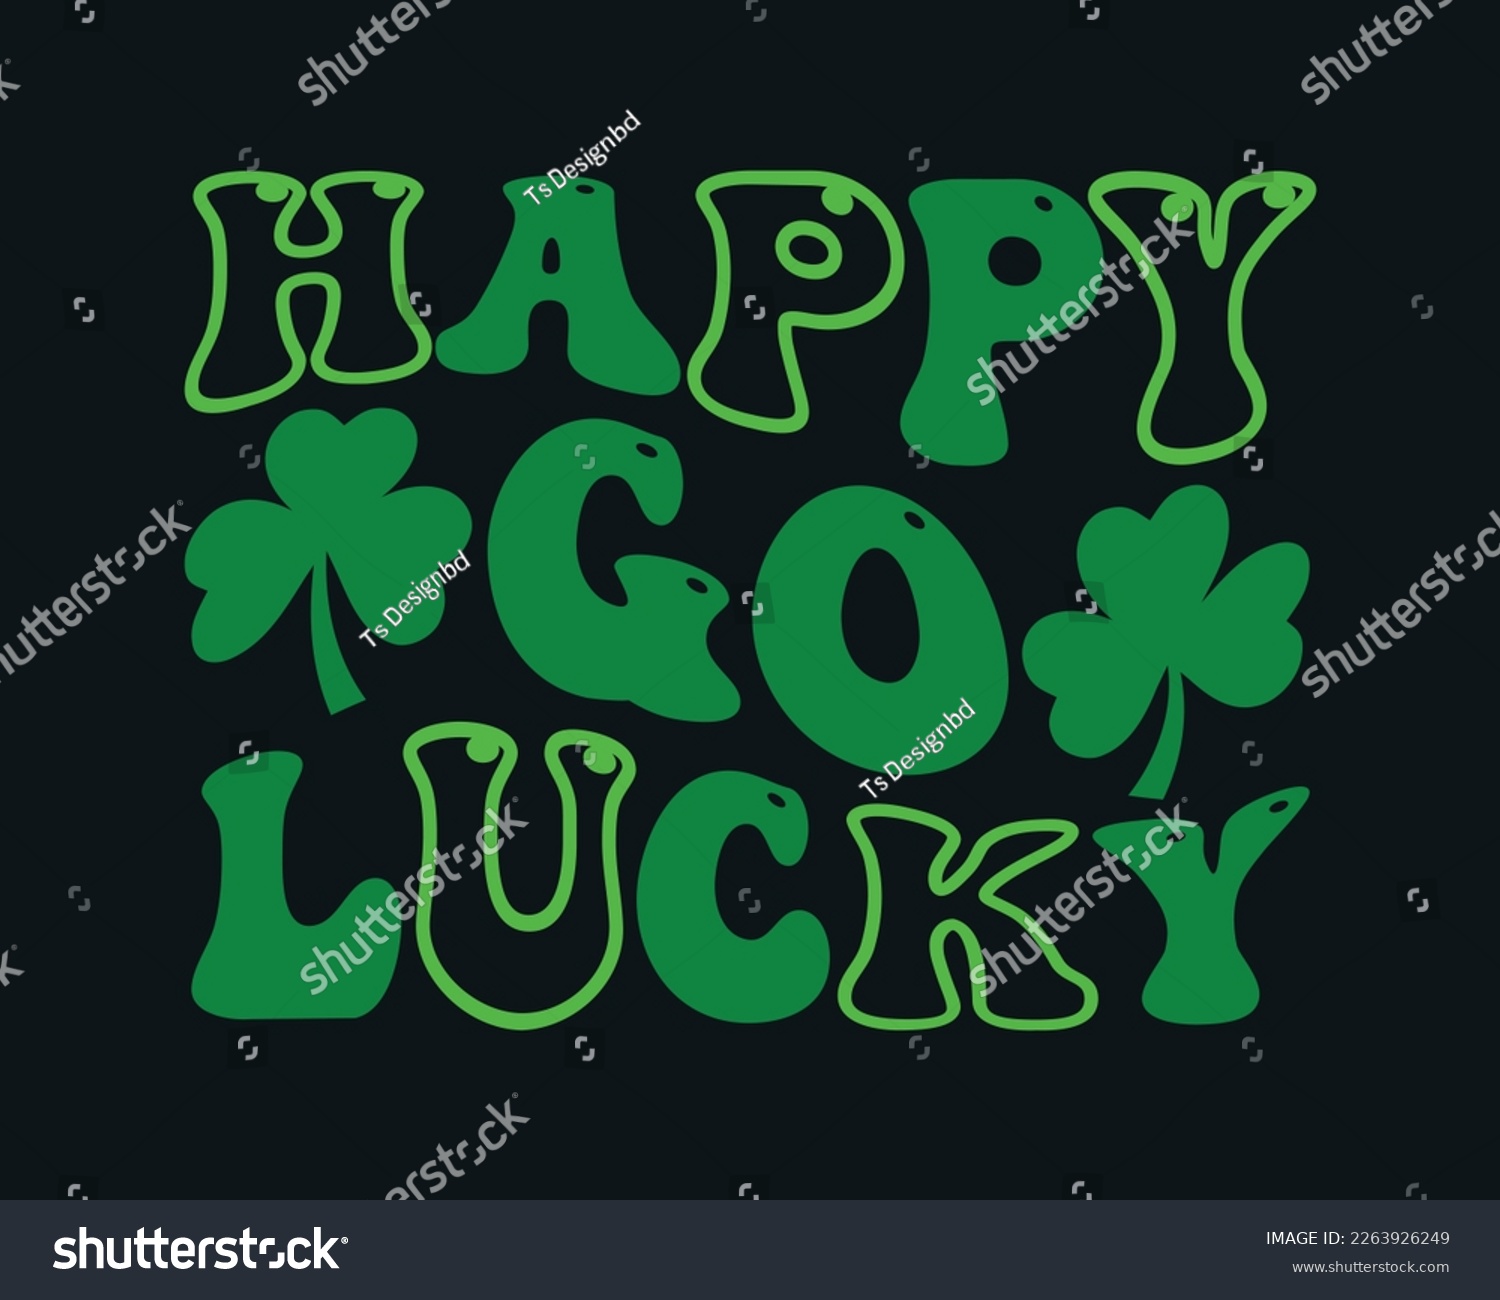 SVG of Happy Go Lucky Svg Design,Happy St Patricks Day Svg Design,St. Patrick's Day SVG Cut Files,St. Patrick's Day Retro SVG  svg